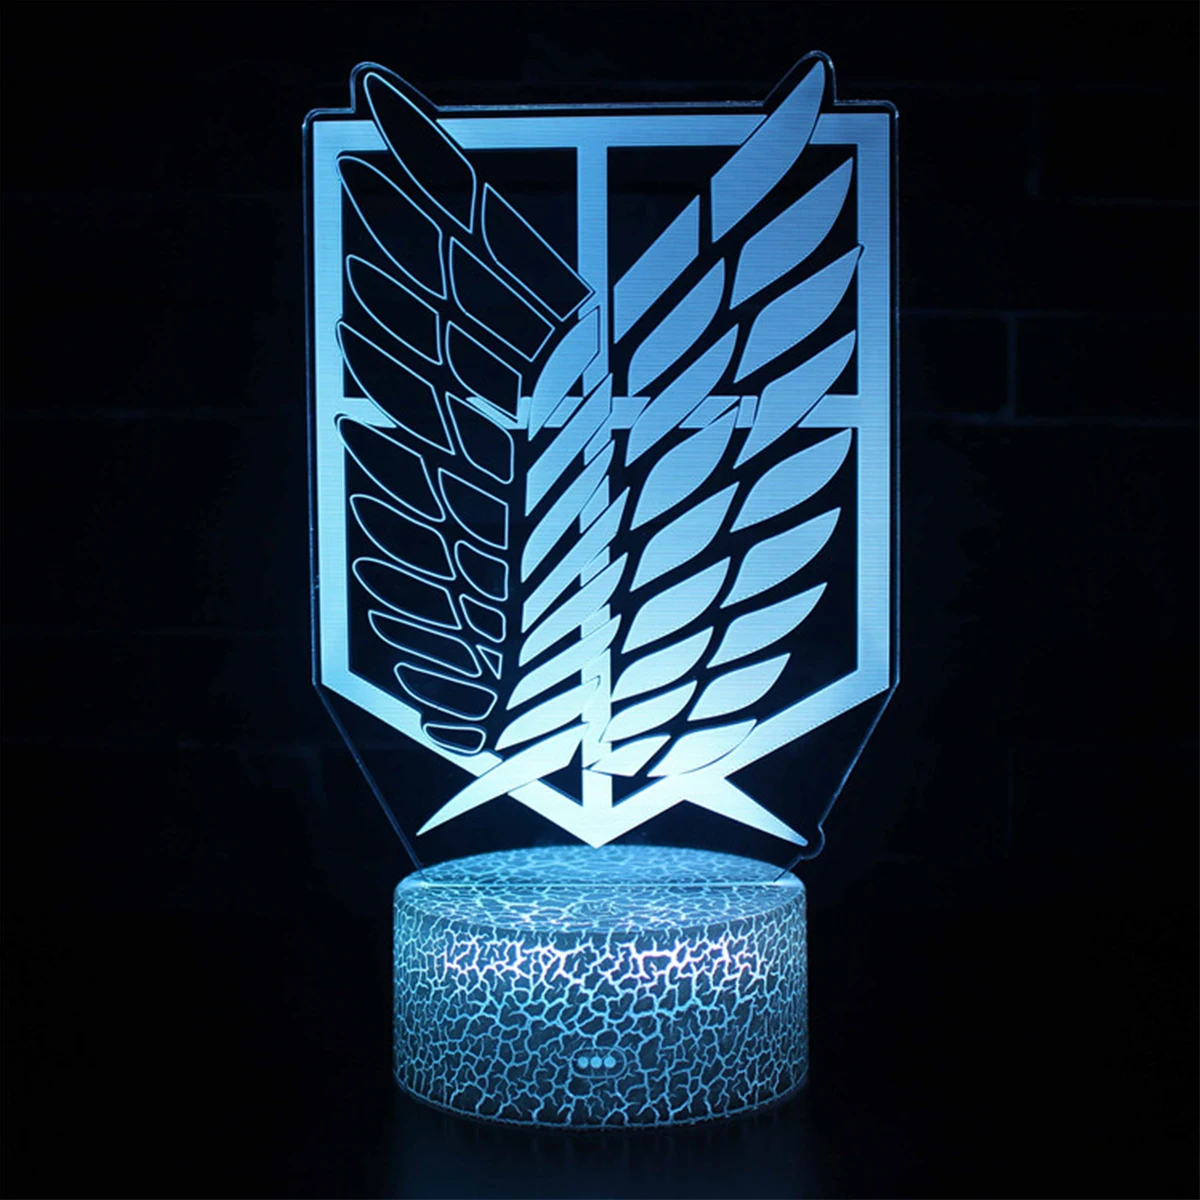 Acrylic Table Lamp Anime Attack on Titan for Home Room Decor Light Cool Kid Child Gift Captain Rivaille Ackerman Night Light childrens night lights Night Lights